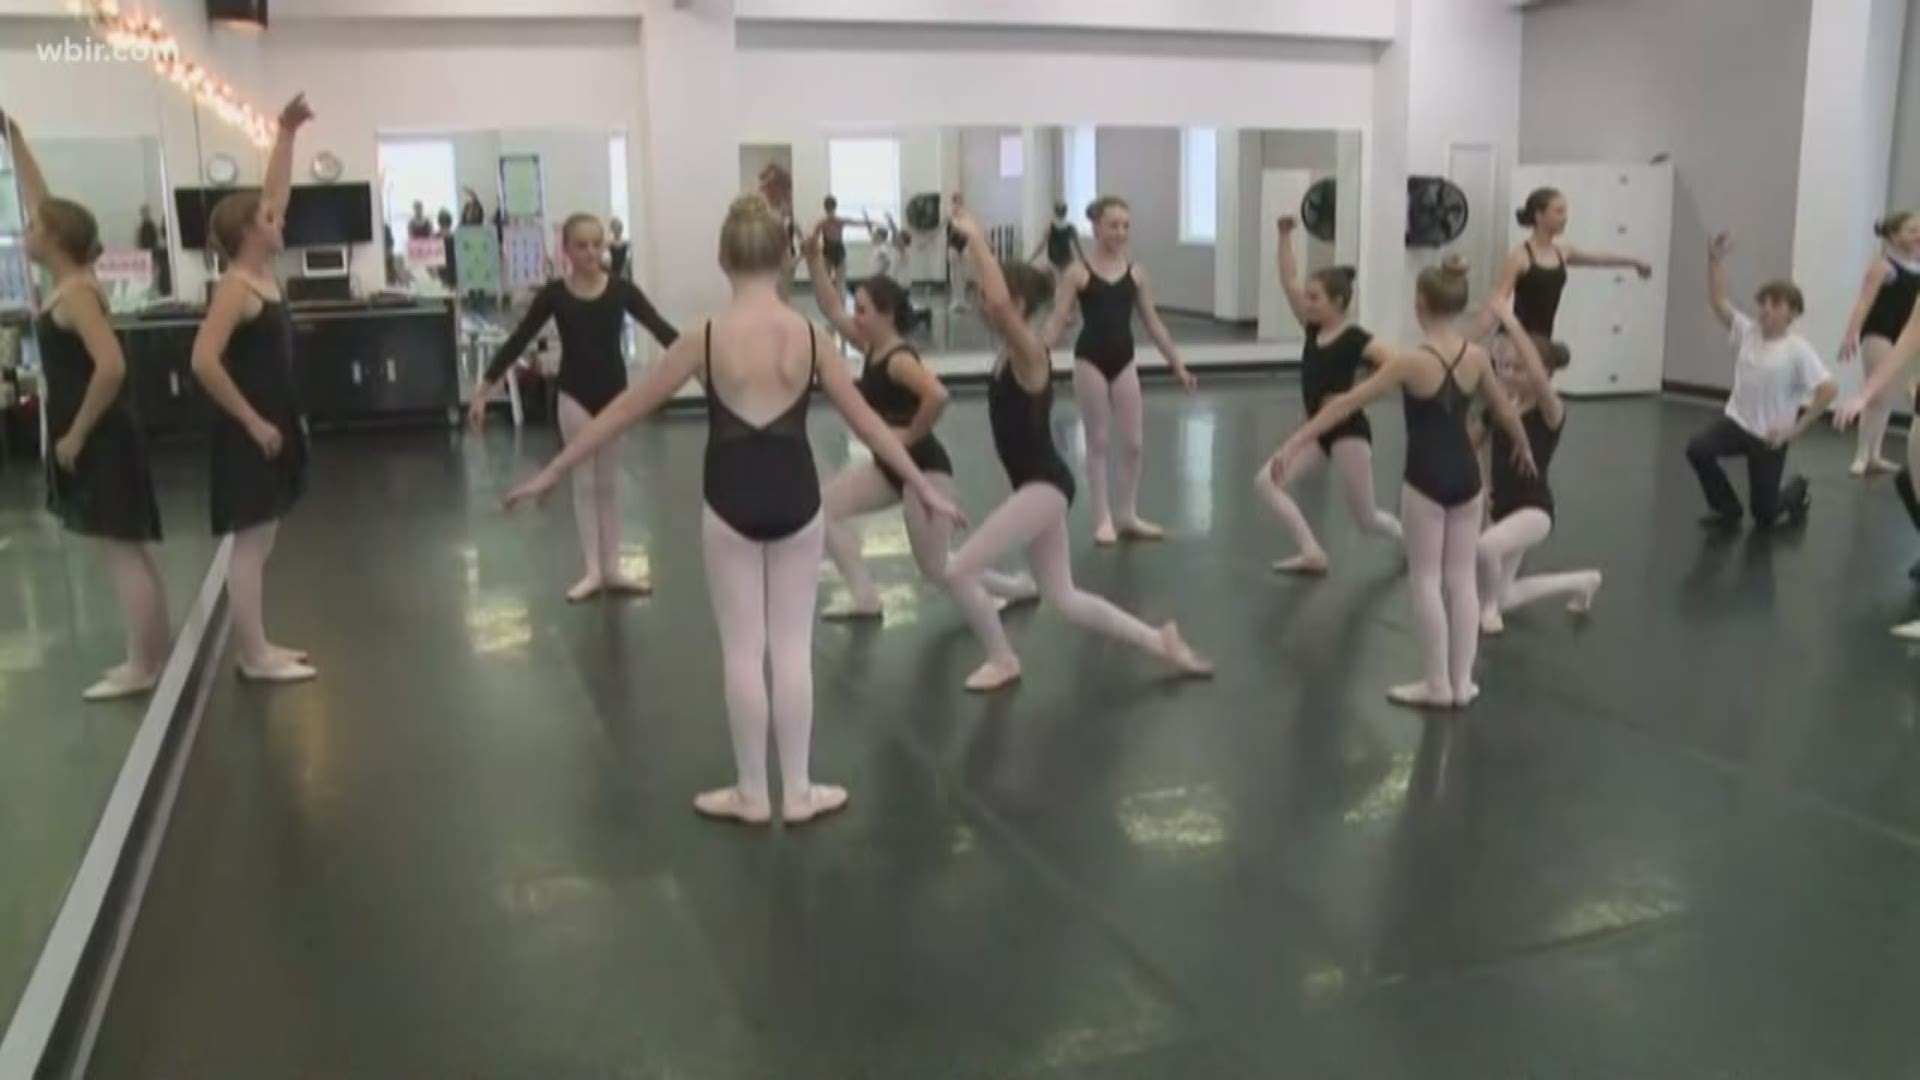 Get a behind-the-scenes look at how a local ballet company is preparing to perform "The Nutcracker"!